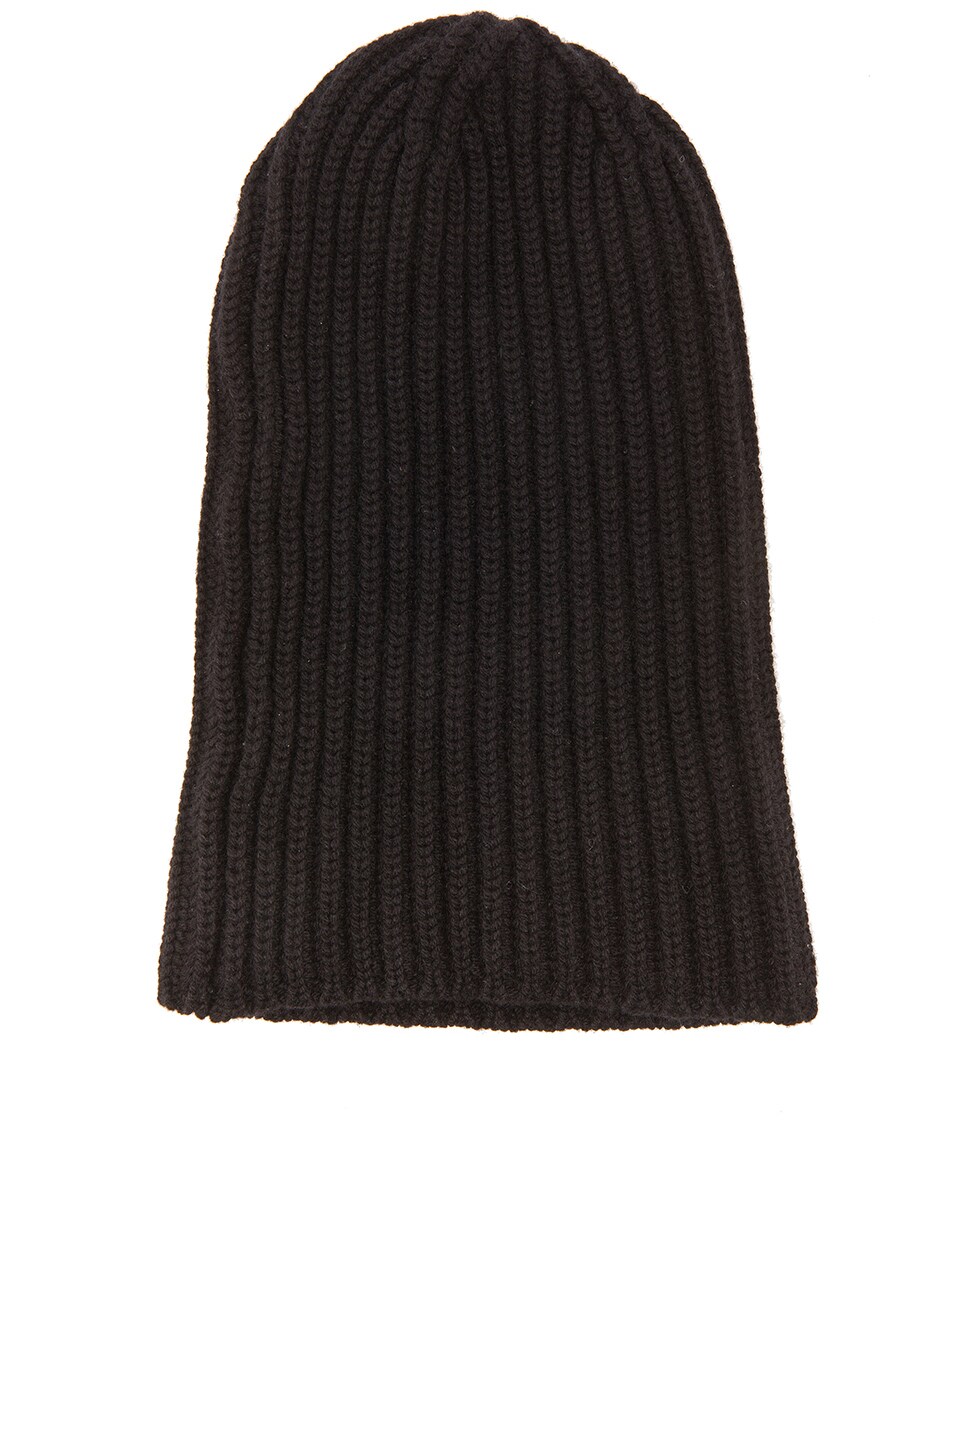 Image 1 of Engineered Garments Cashmere Sweater Knit Beanie in Black